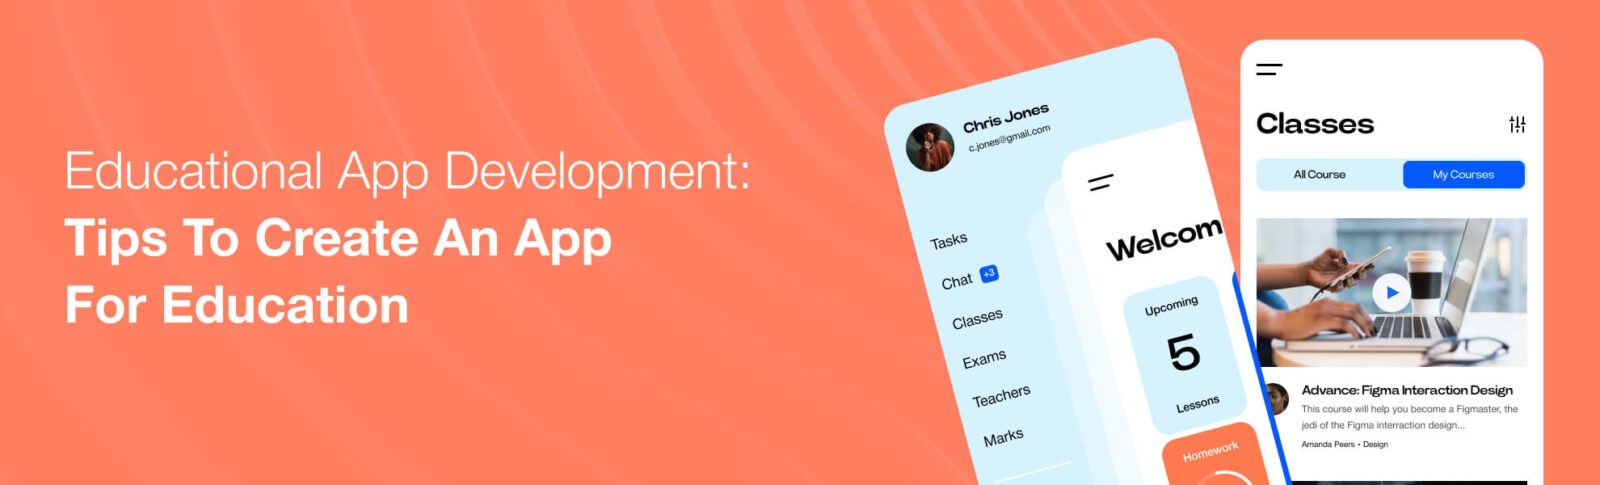 Educational App Development: Tips to Create an App for Education